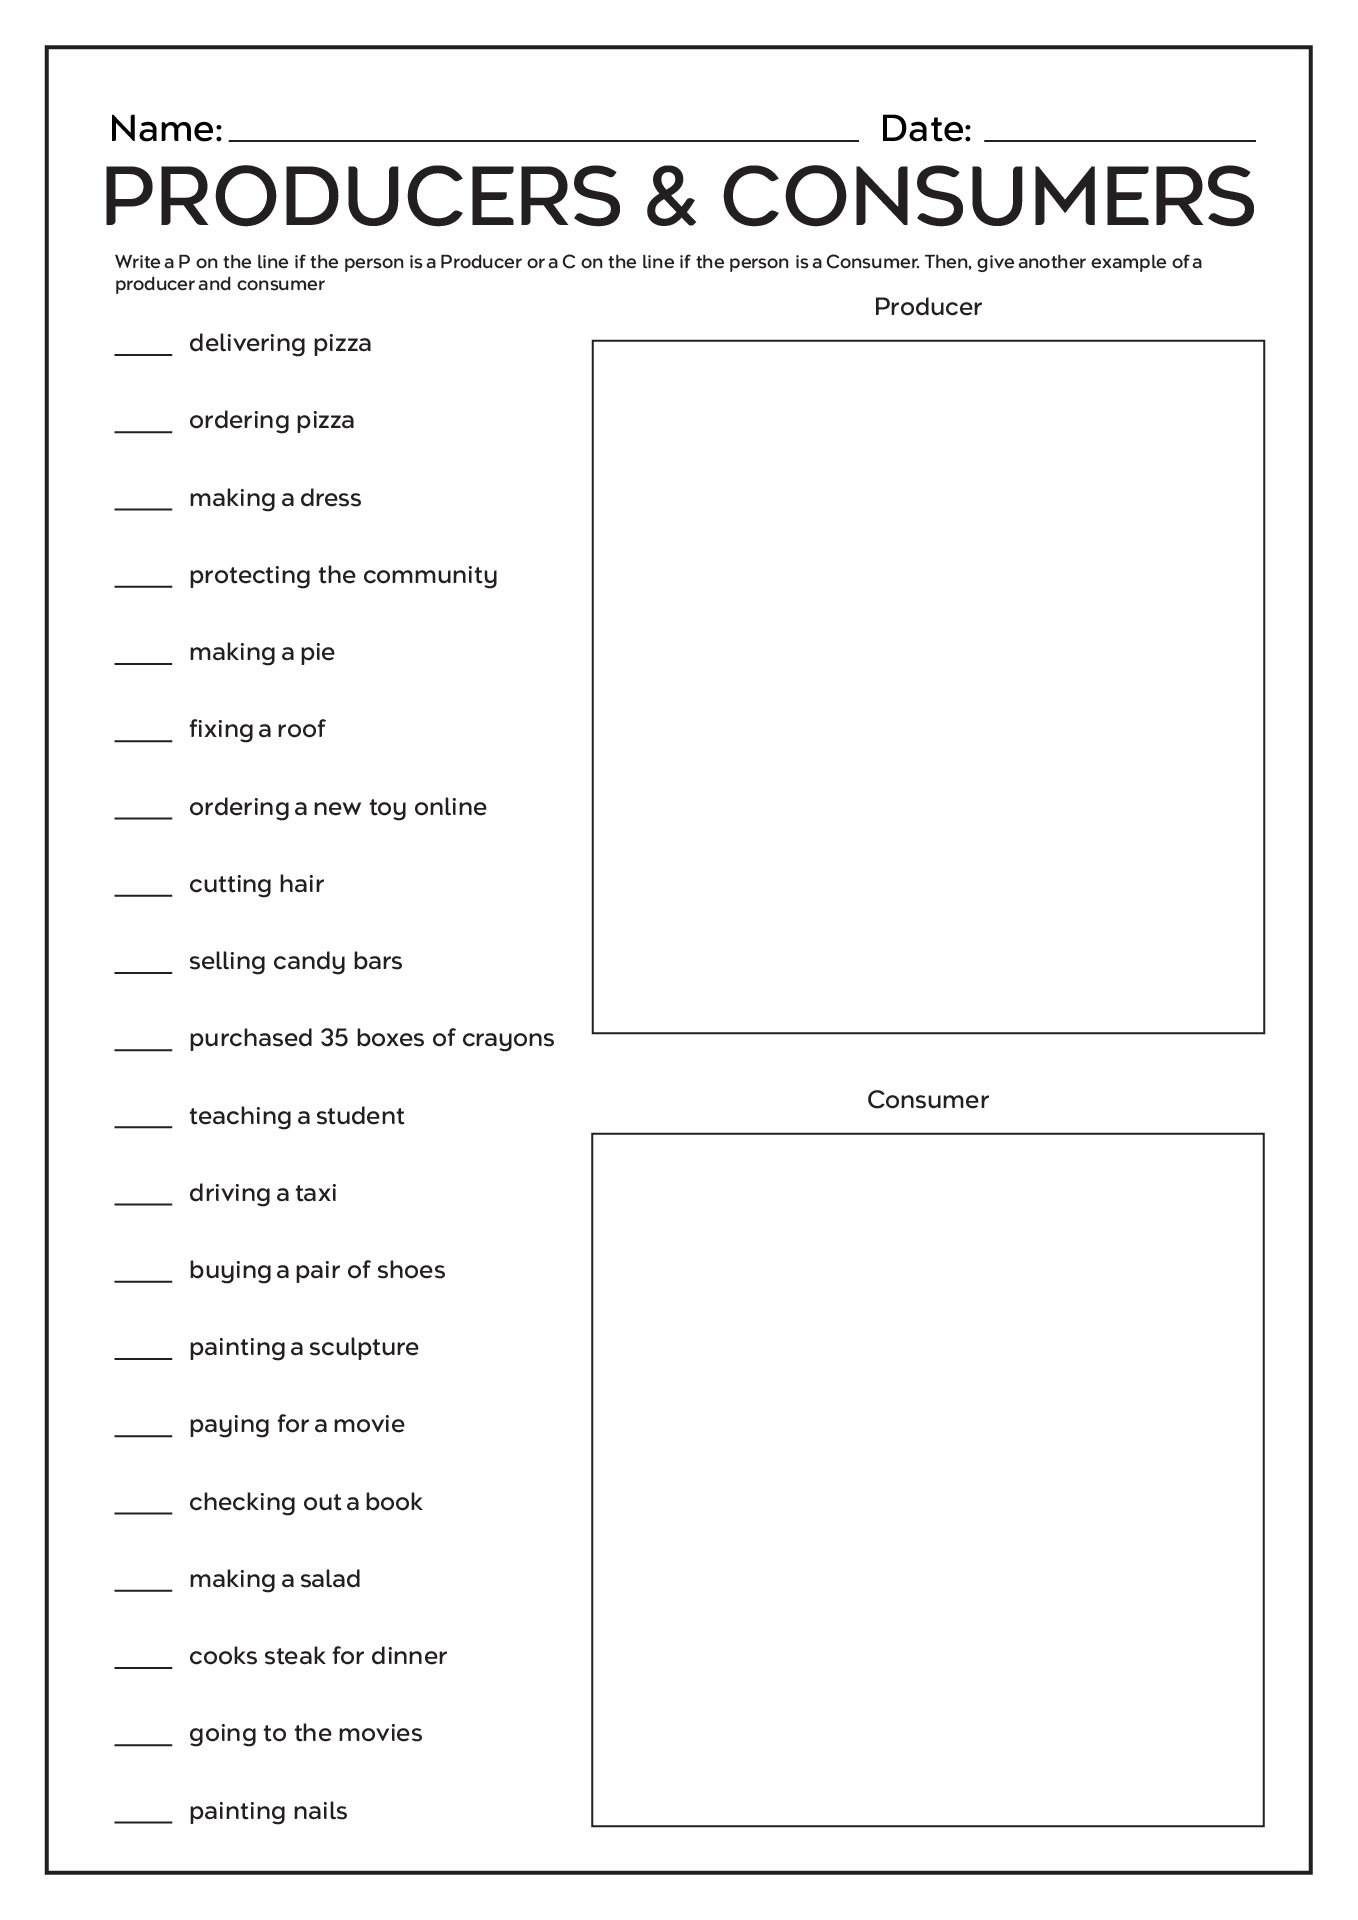 Producers and Consumers Economics Worksheets Image